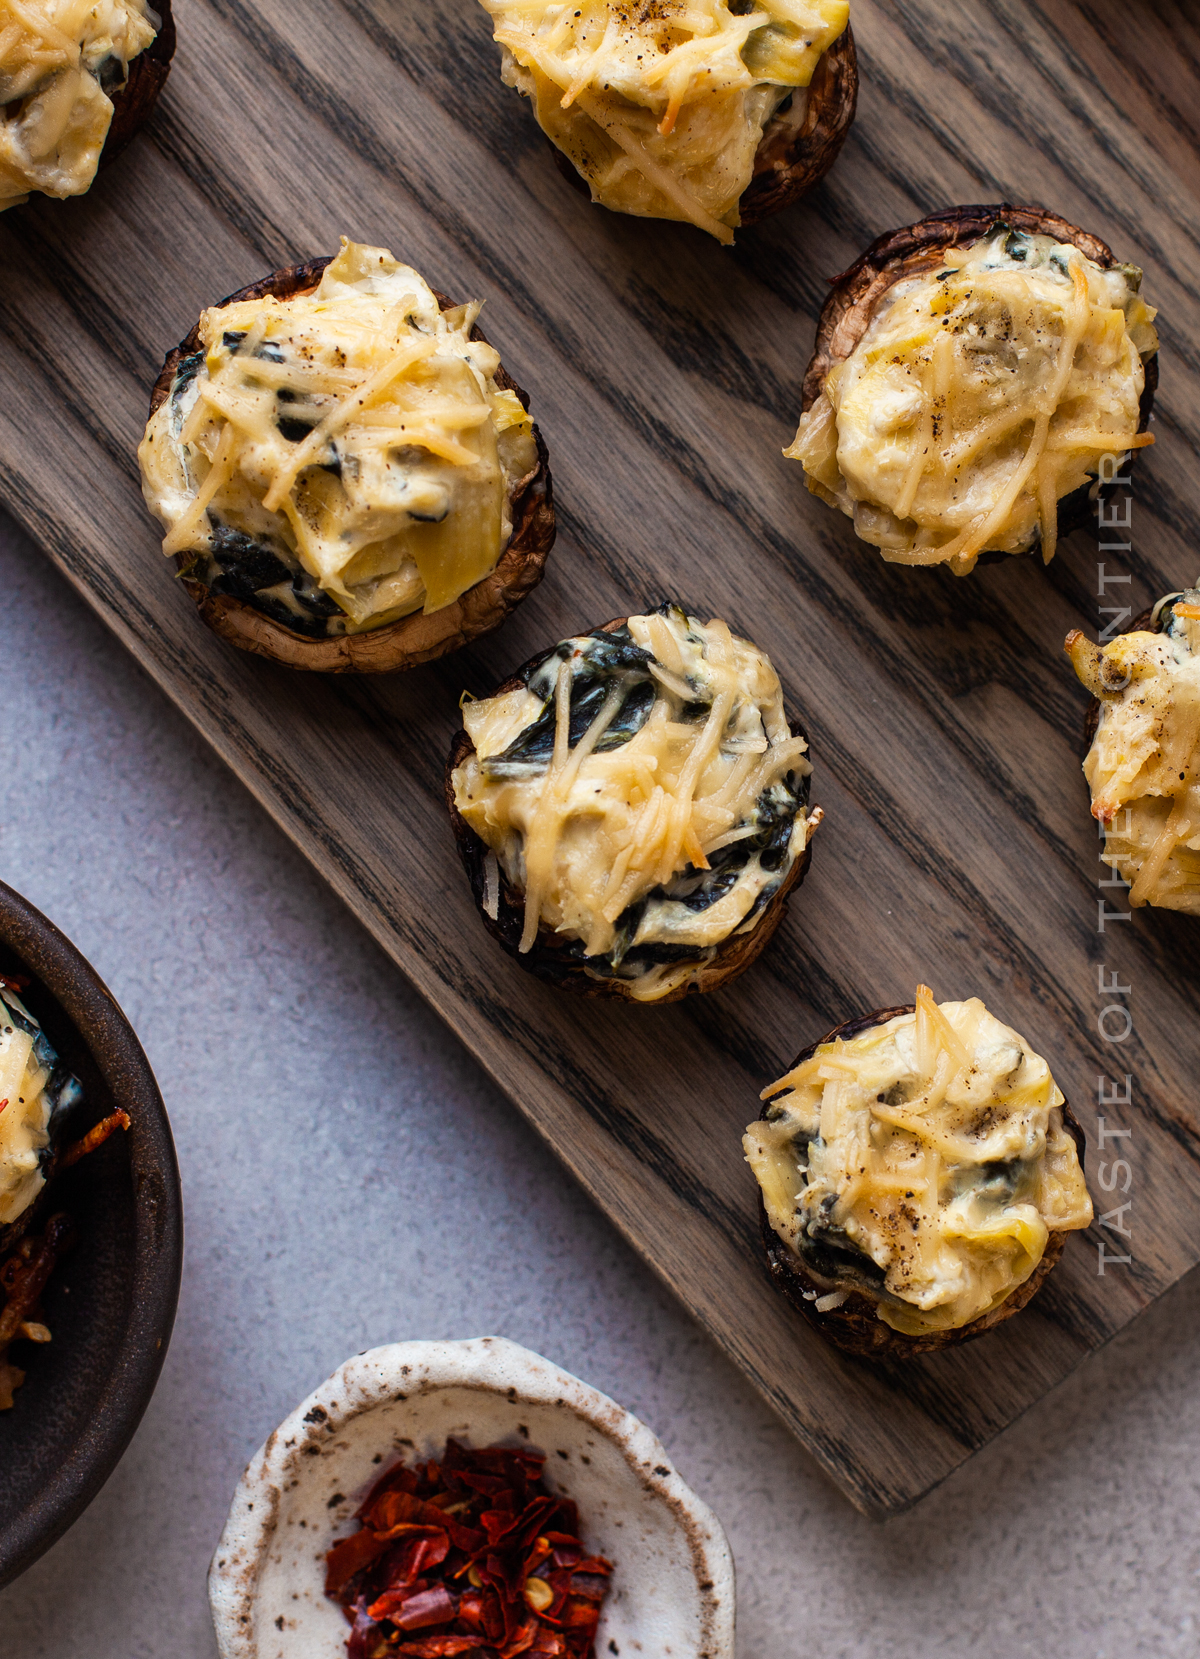 game day appetizer - Stuffed Mushrooms